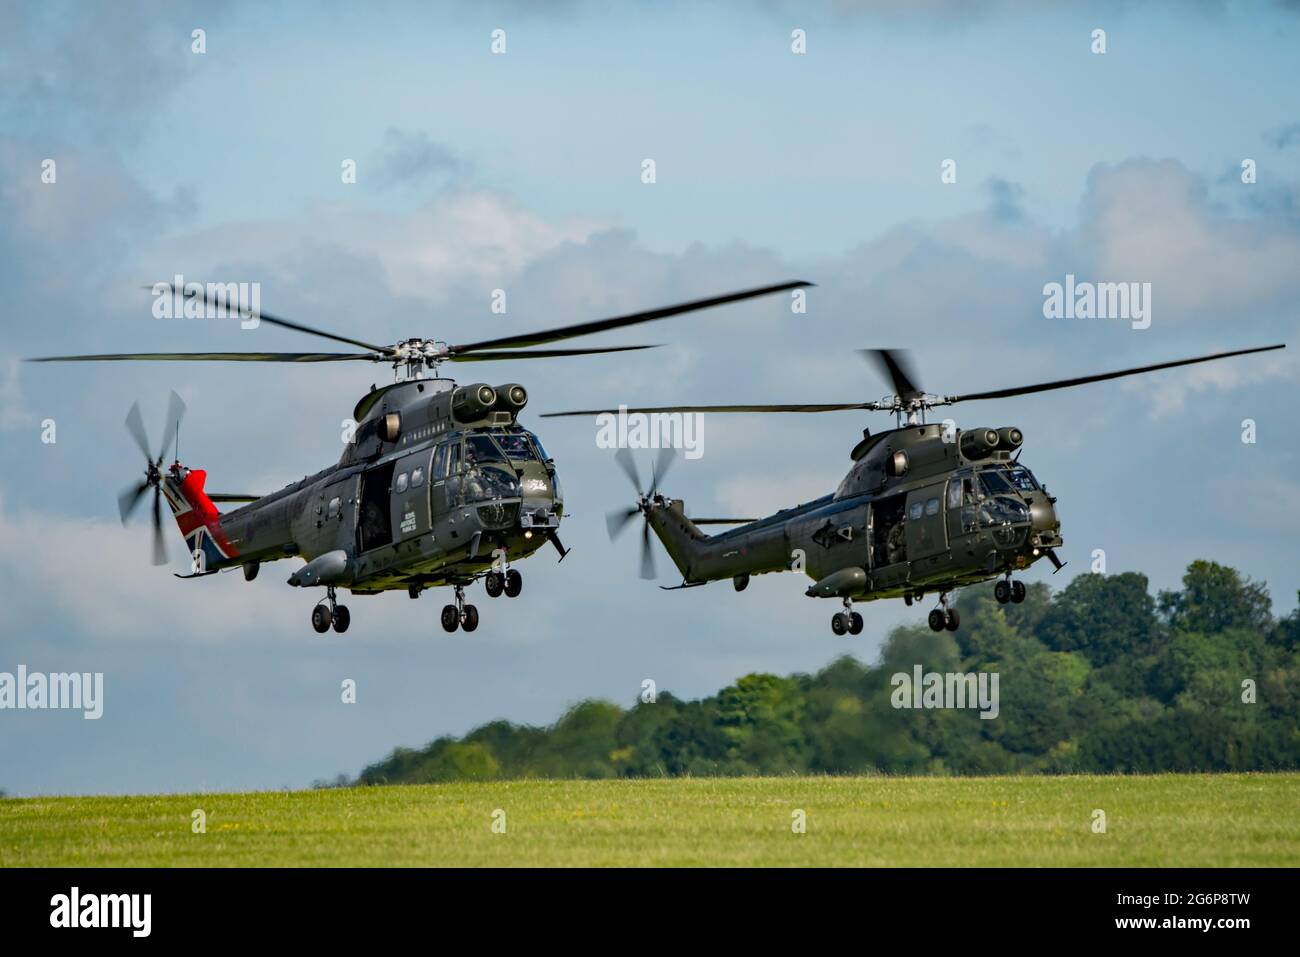 Aircraft from the RAF Puma helicopter force 50th Anniversary flypast lift off from AAC Middle Wallop, Hants on the 7th July 2021. Stock Photo